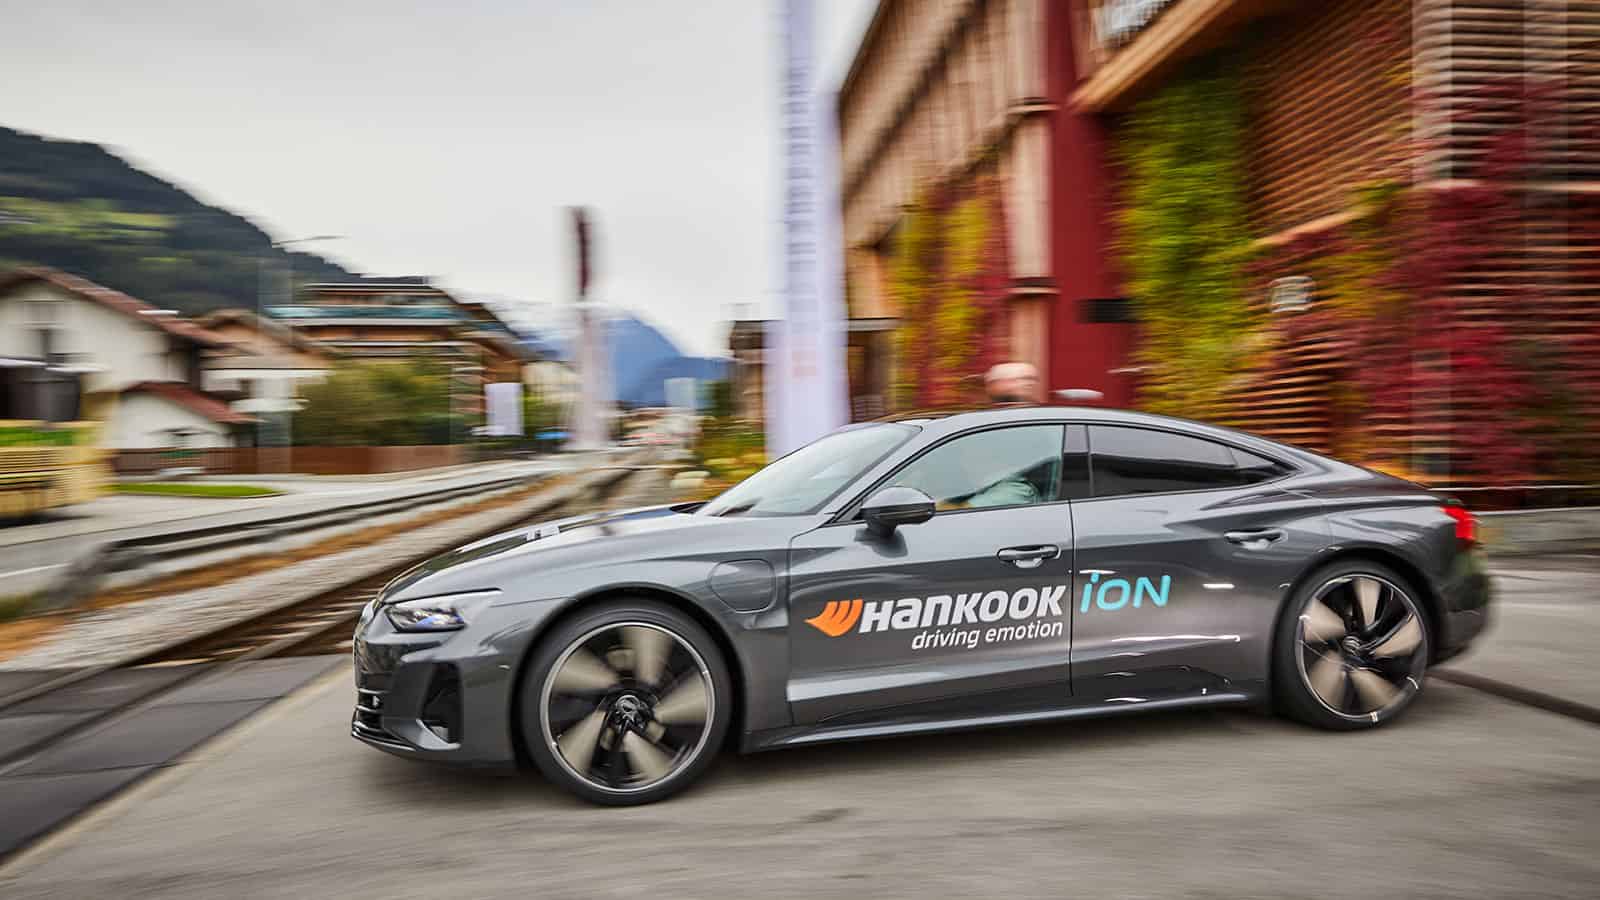 Hankook Tire will soon have an AI system for EVs